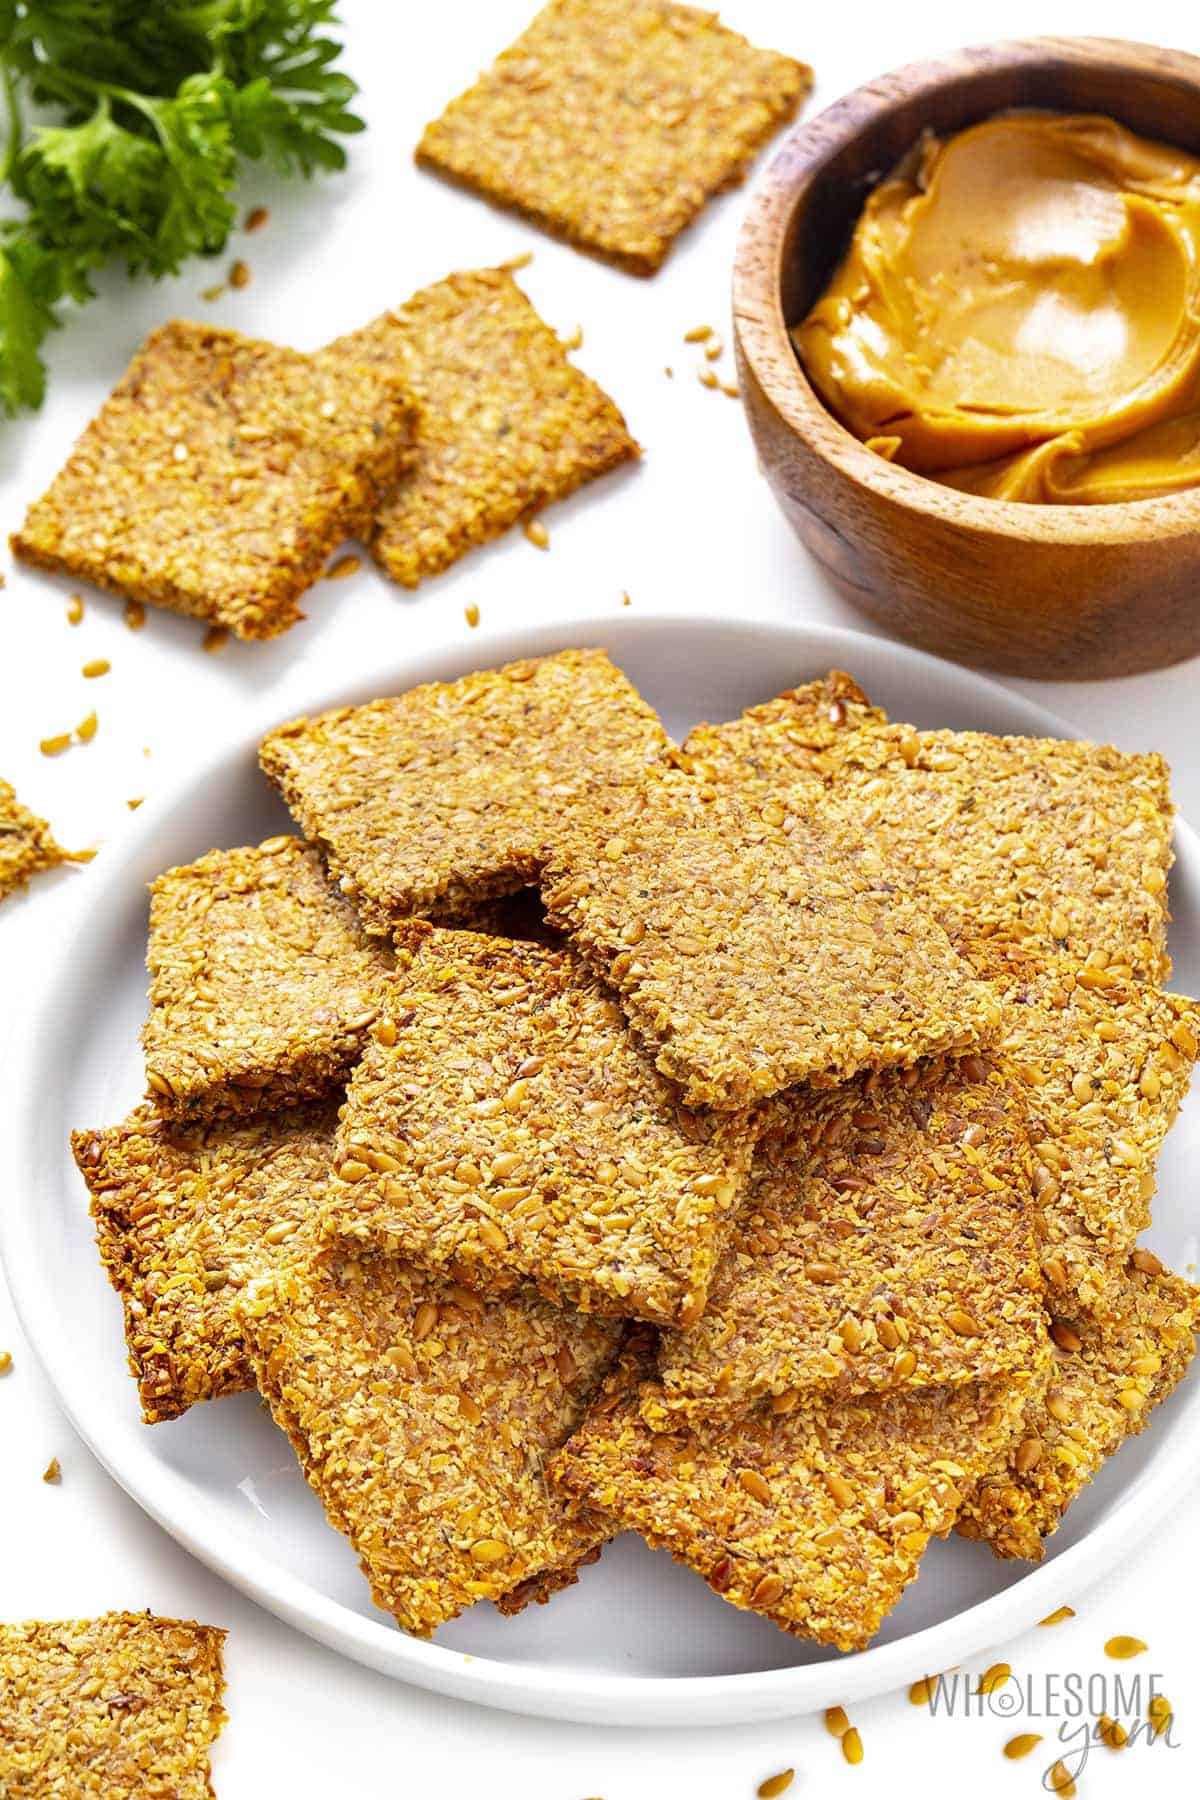 Crackers made with flax on a plate